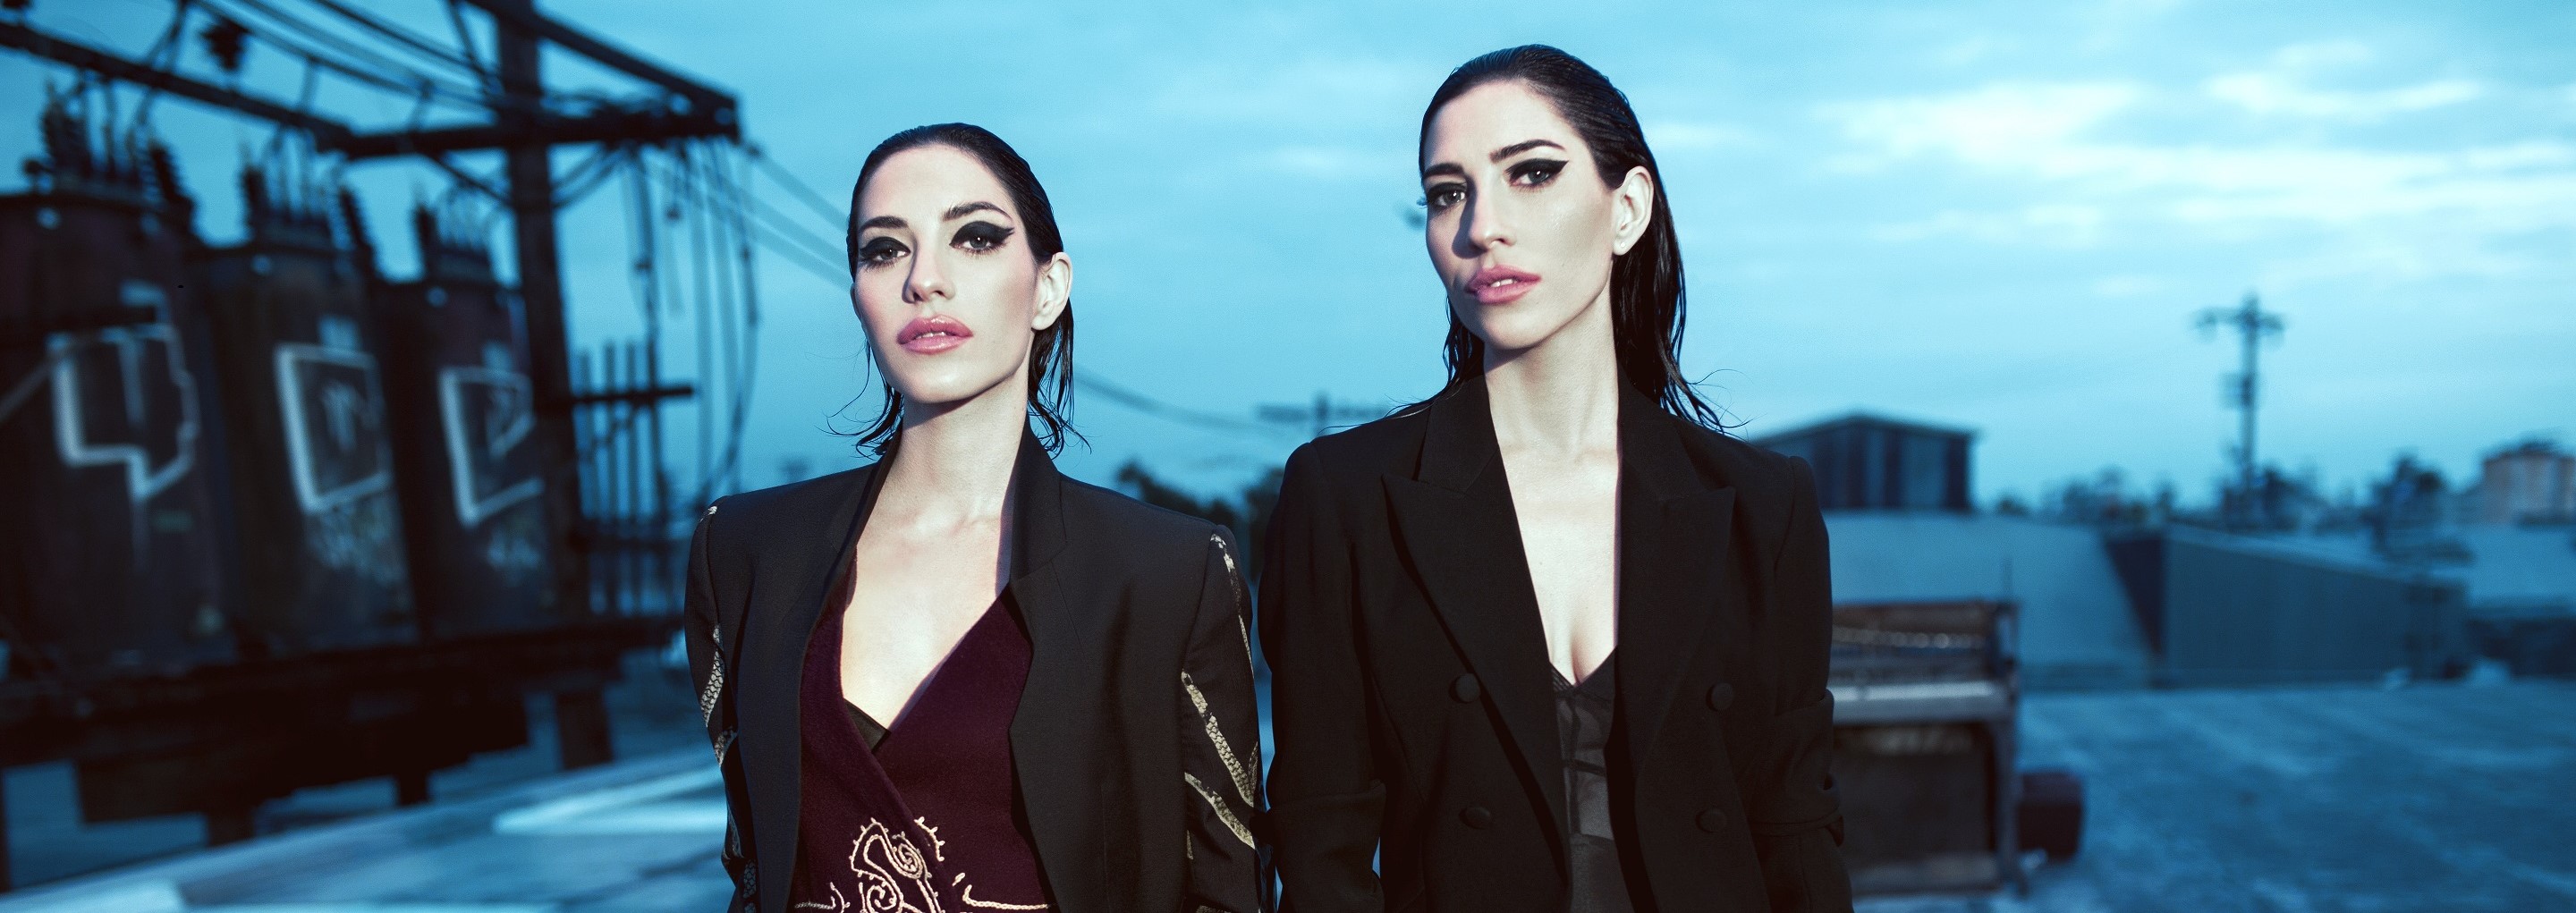 THE VERONICAS RELEASE INCREDIBLE NEW SINGLE ‘THE ONLY HIGH’ OUT NOW!